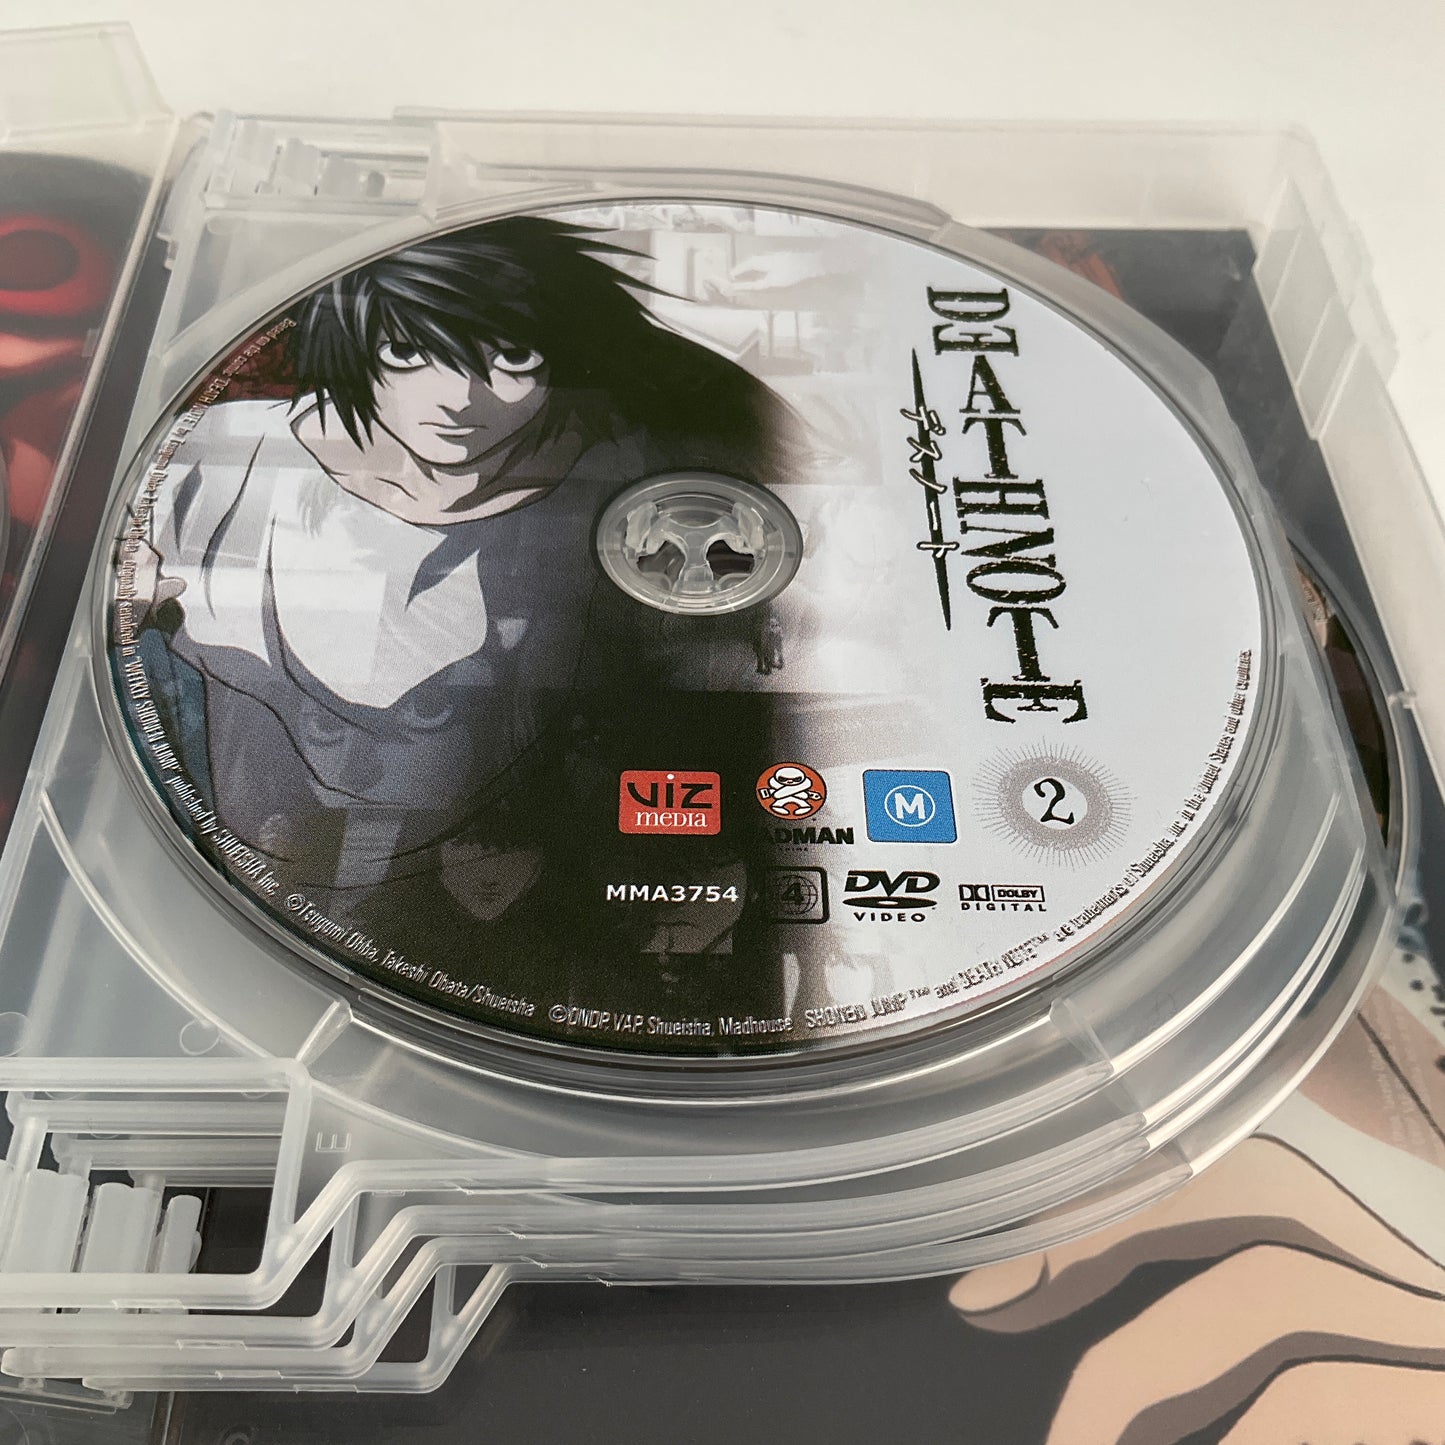 Madman - Death Note Complete Collection